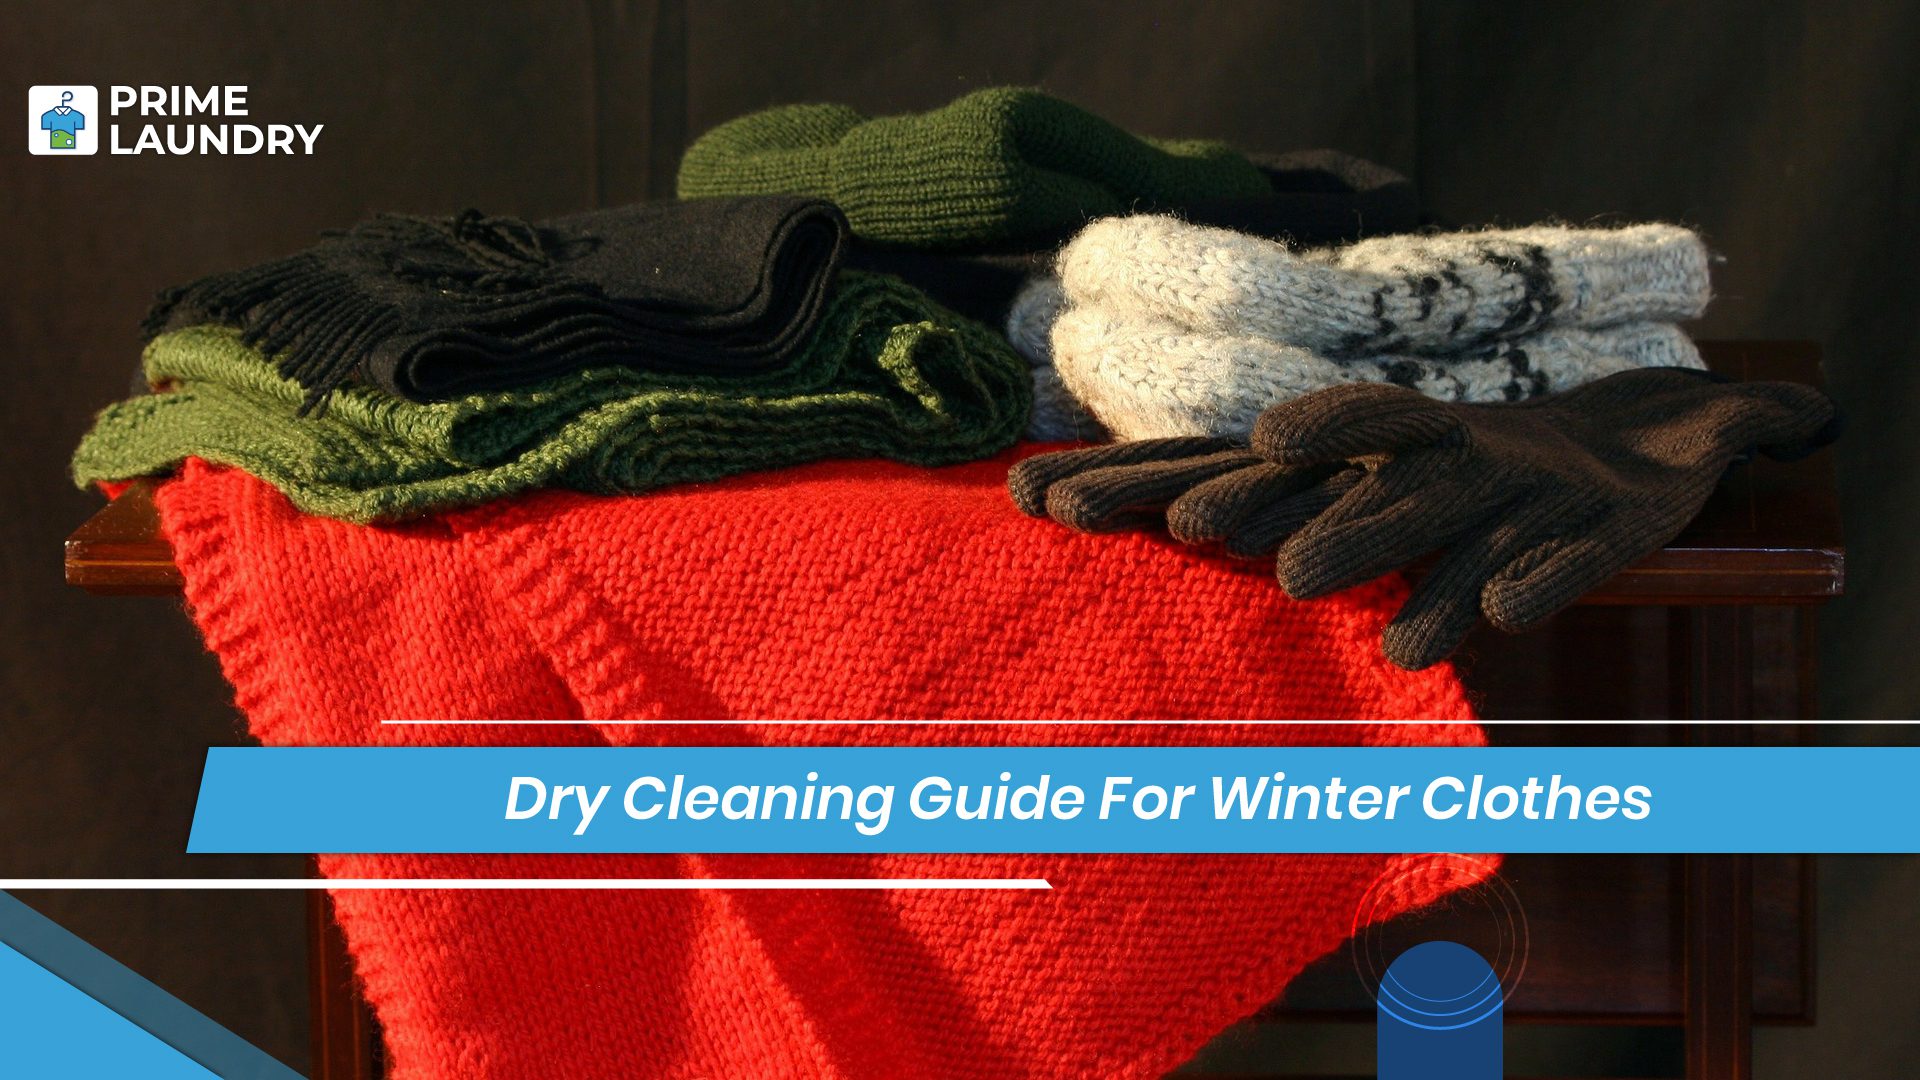 Dry Cleaning Guide To Protect Your Winter Clothes Before Storing Them